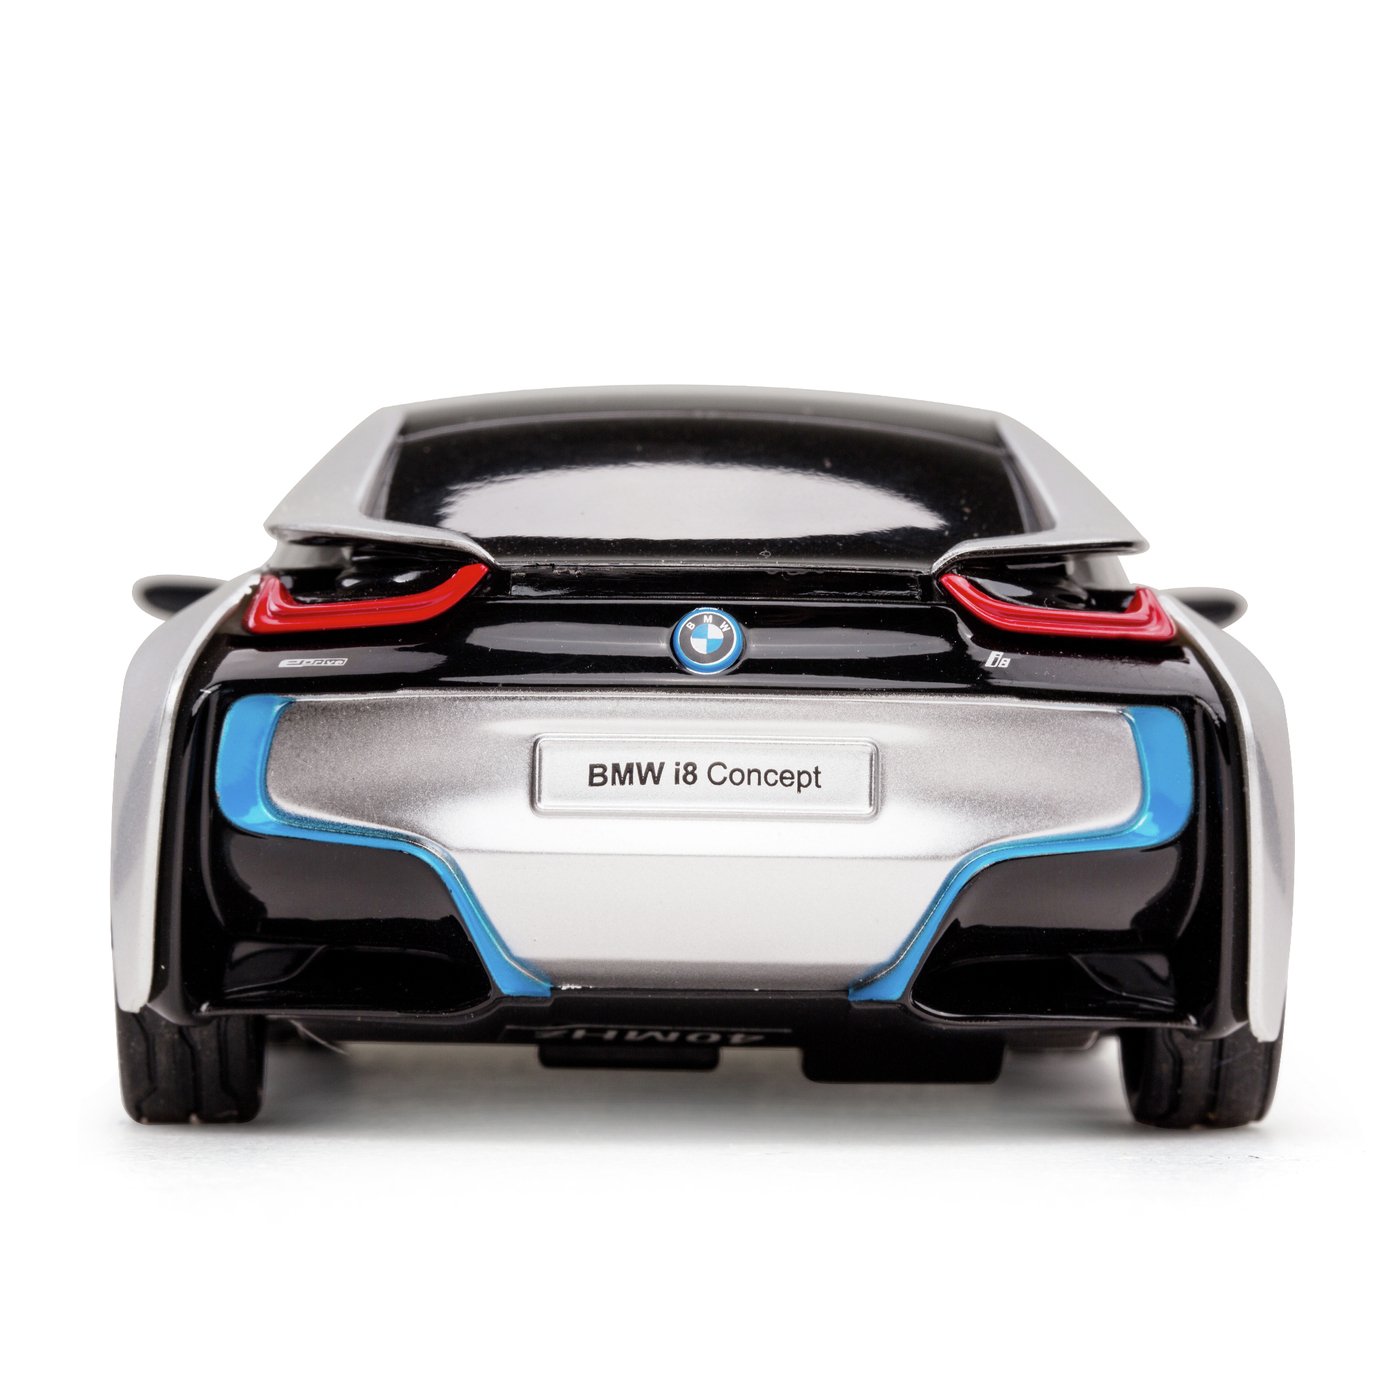 Radio Controlled BMW i8 1:24 Car Review